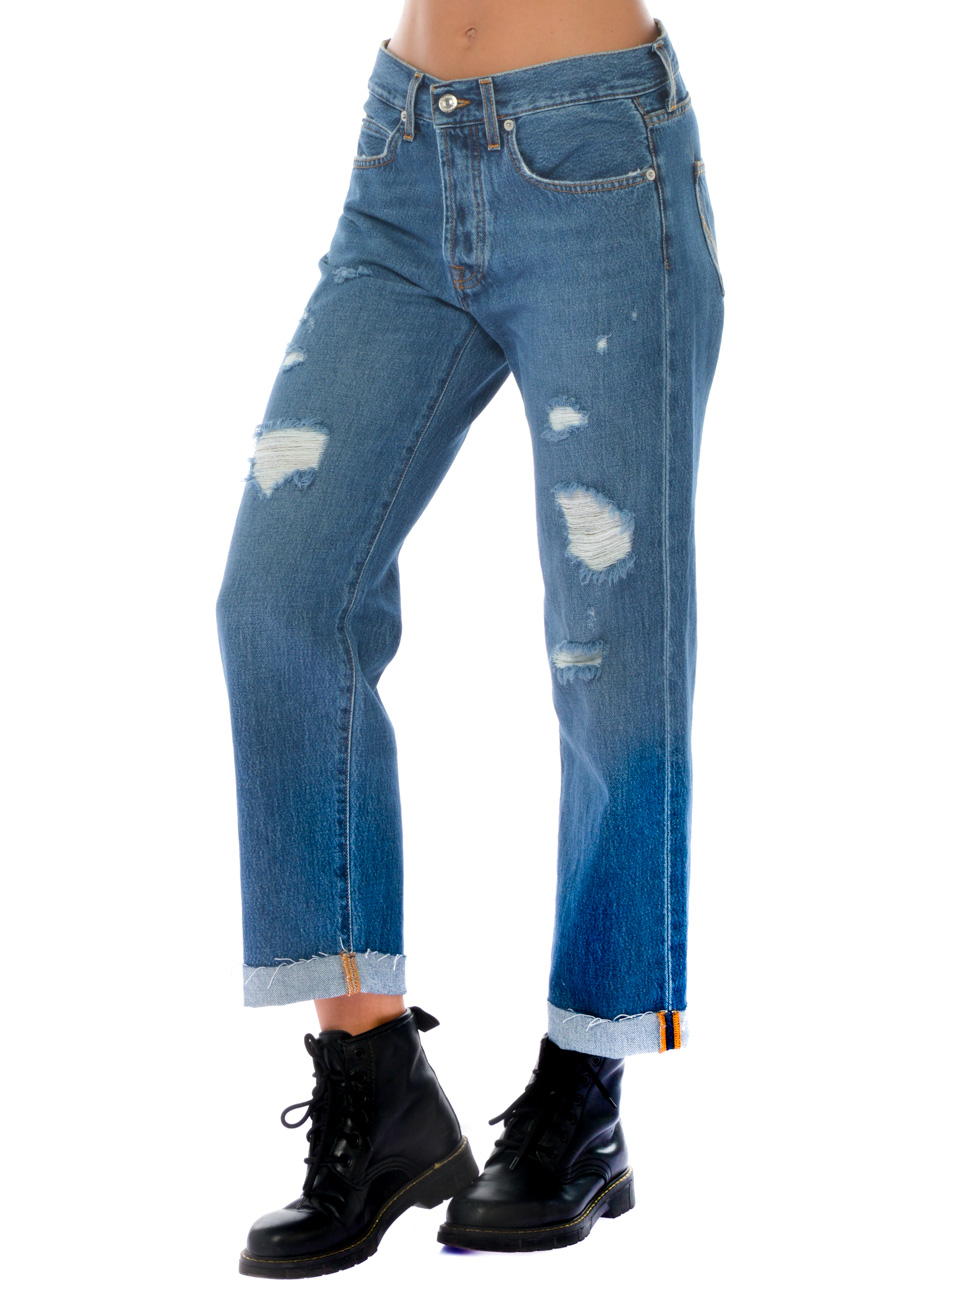 jeans da donna Roy Roger's baggy con rotture